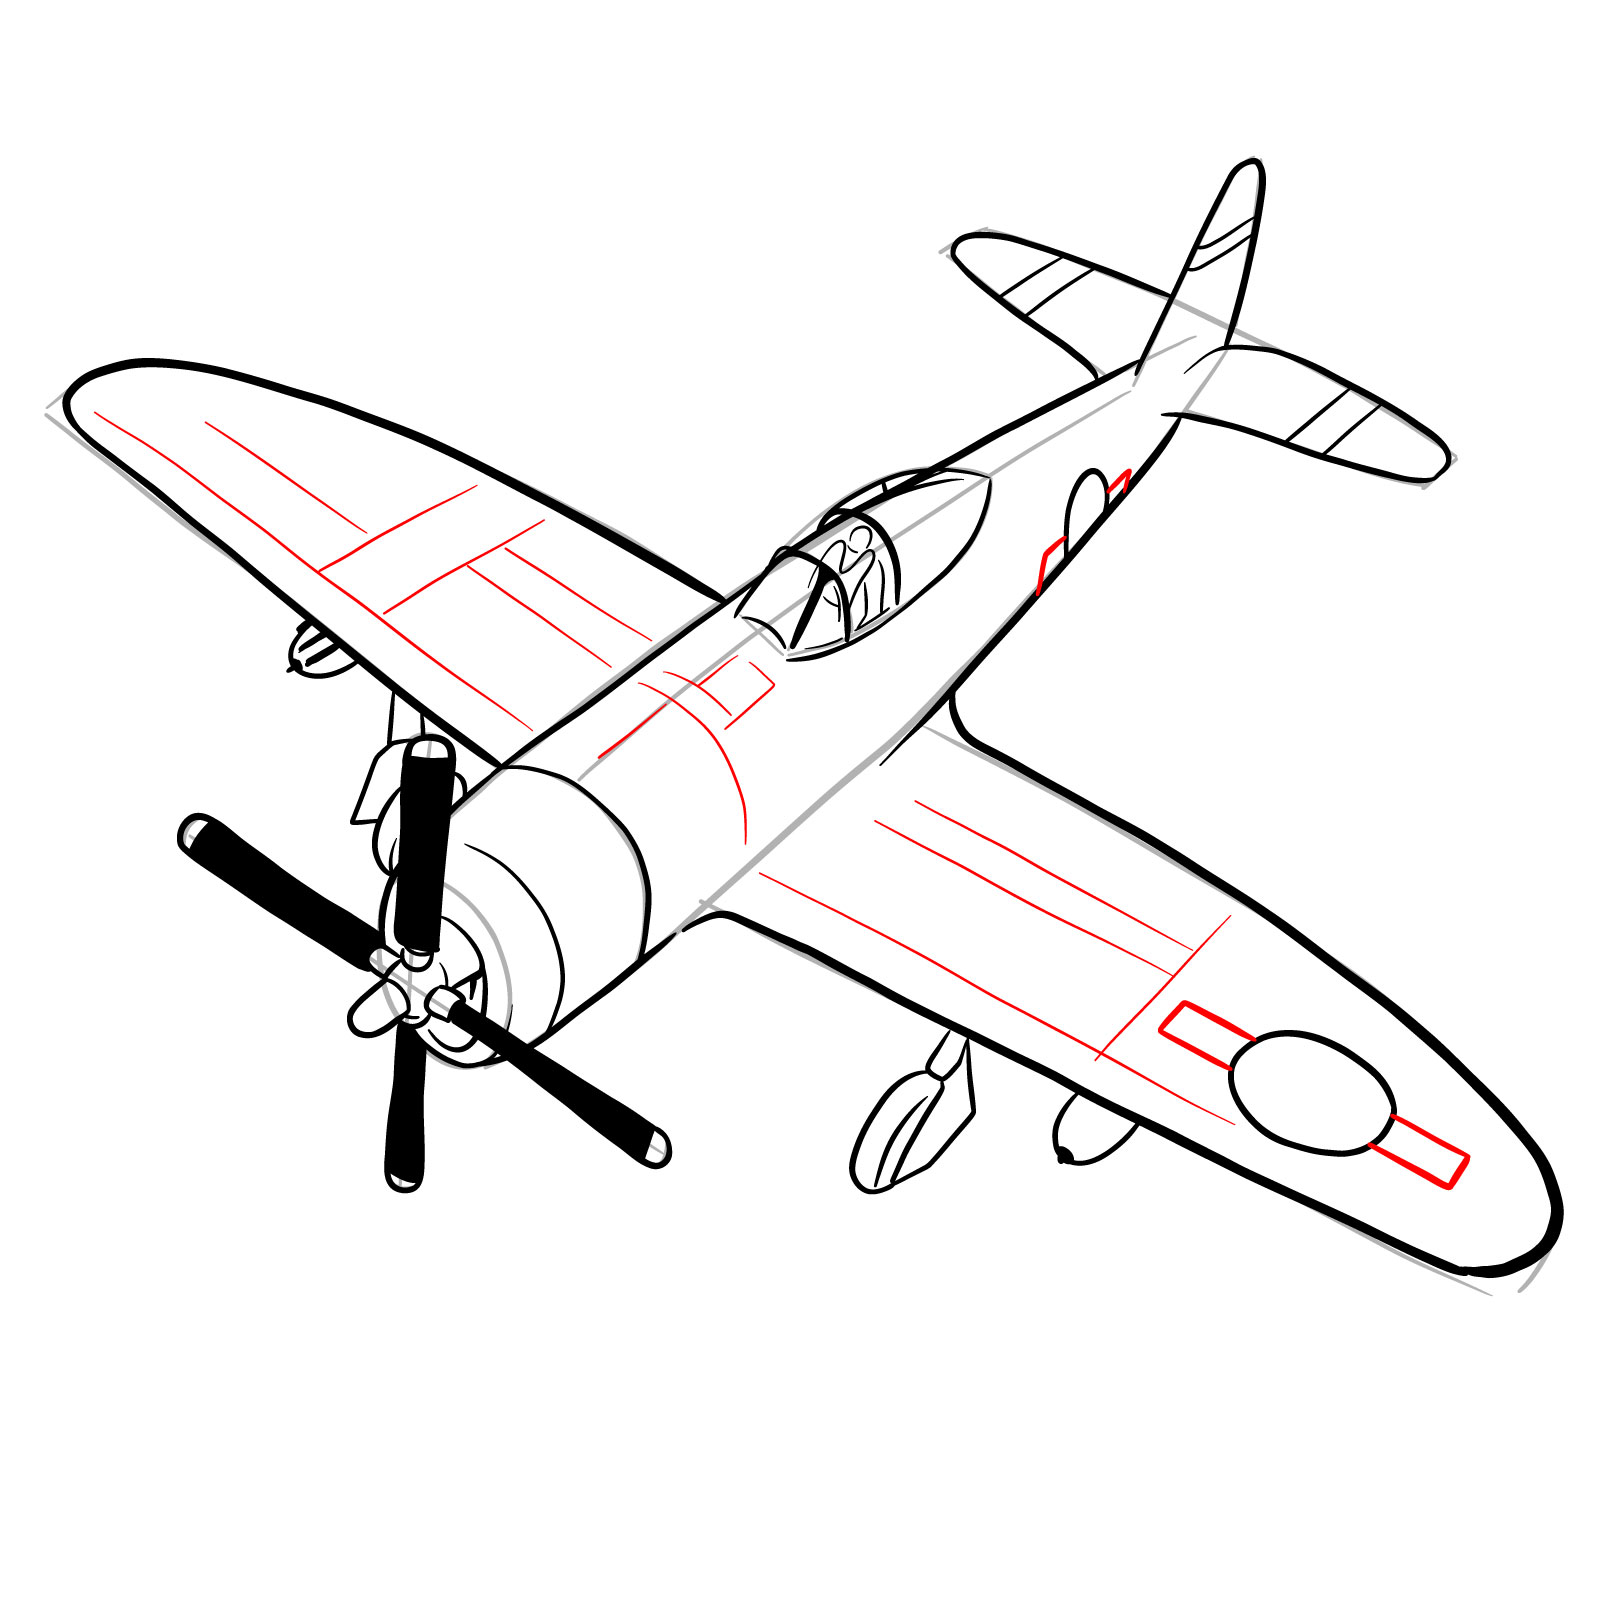 How to draw the Republic P-47 Thunderbolt - step 26